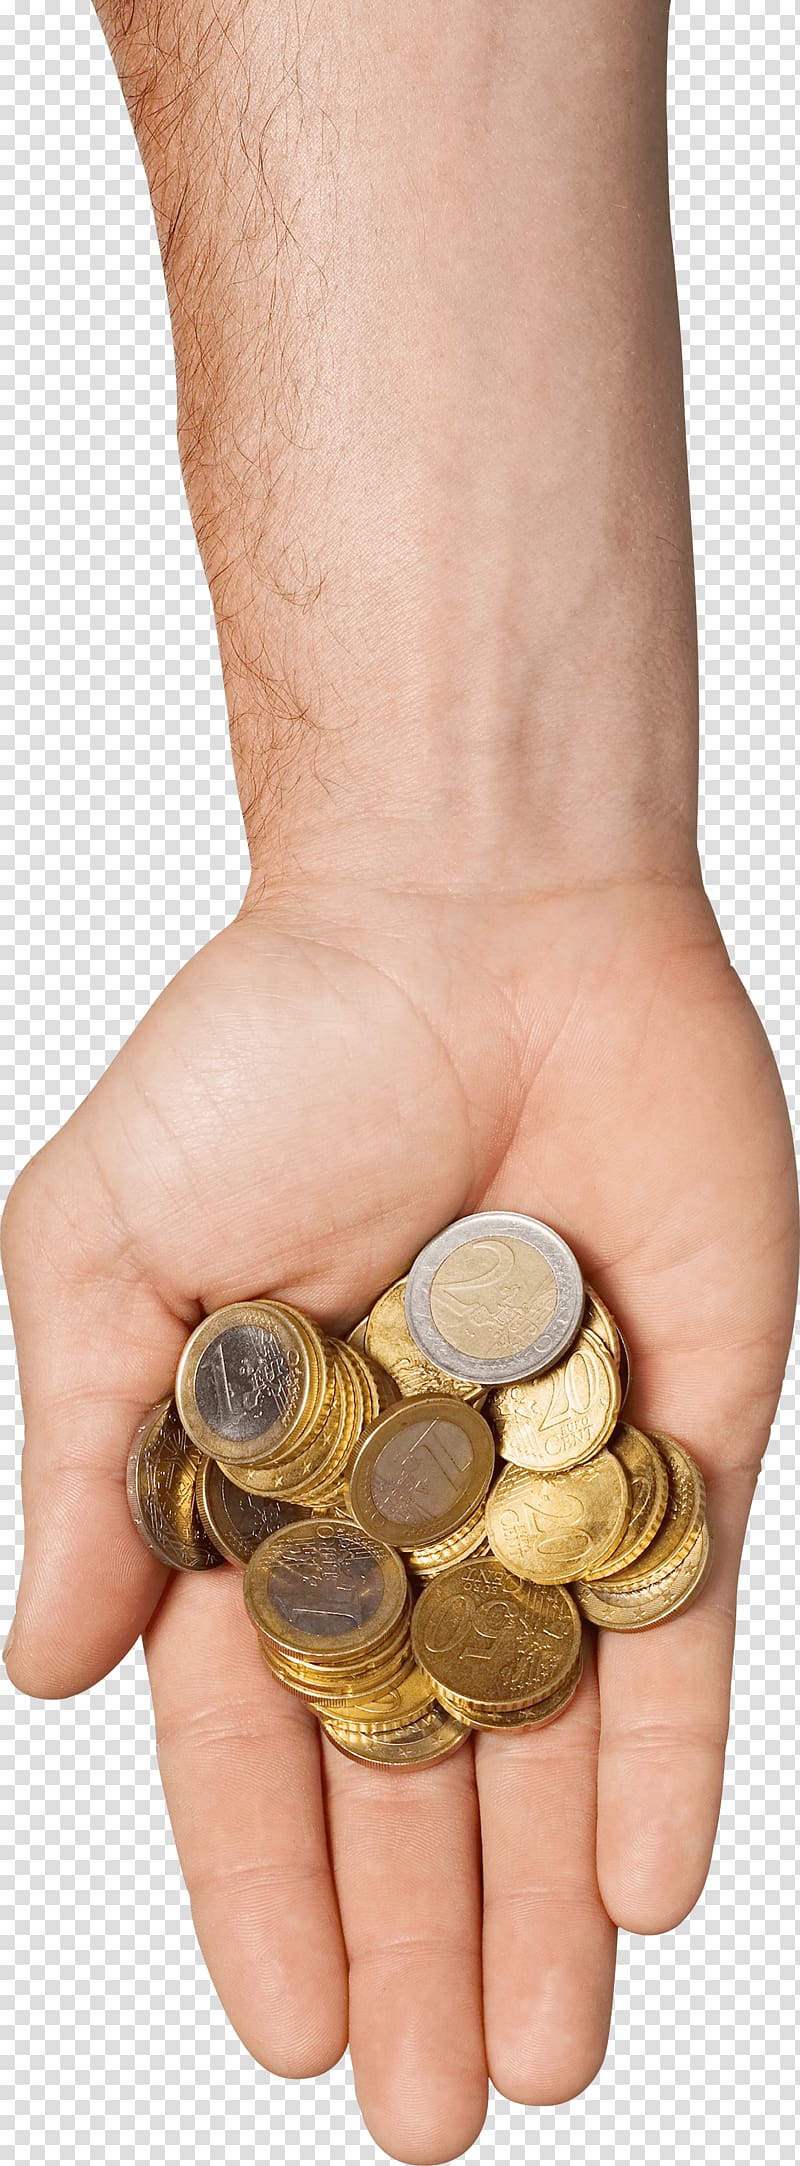 Money Coin, Coins In Hand transparent background PNG clipart